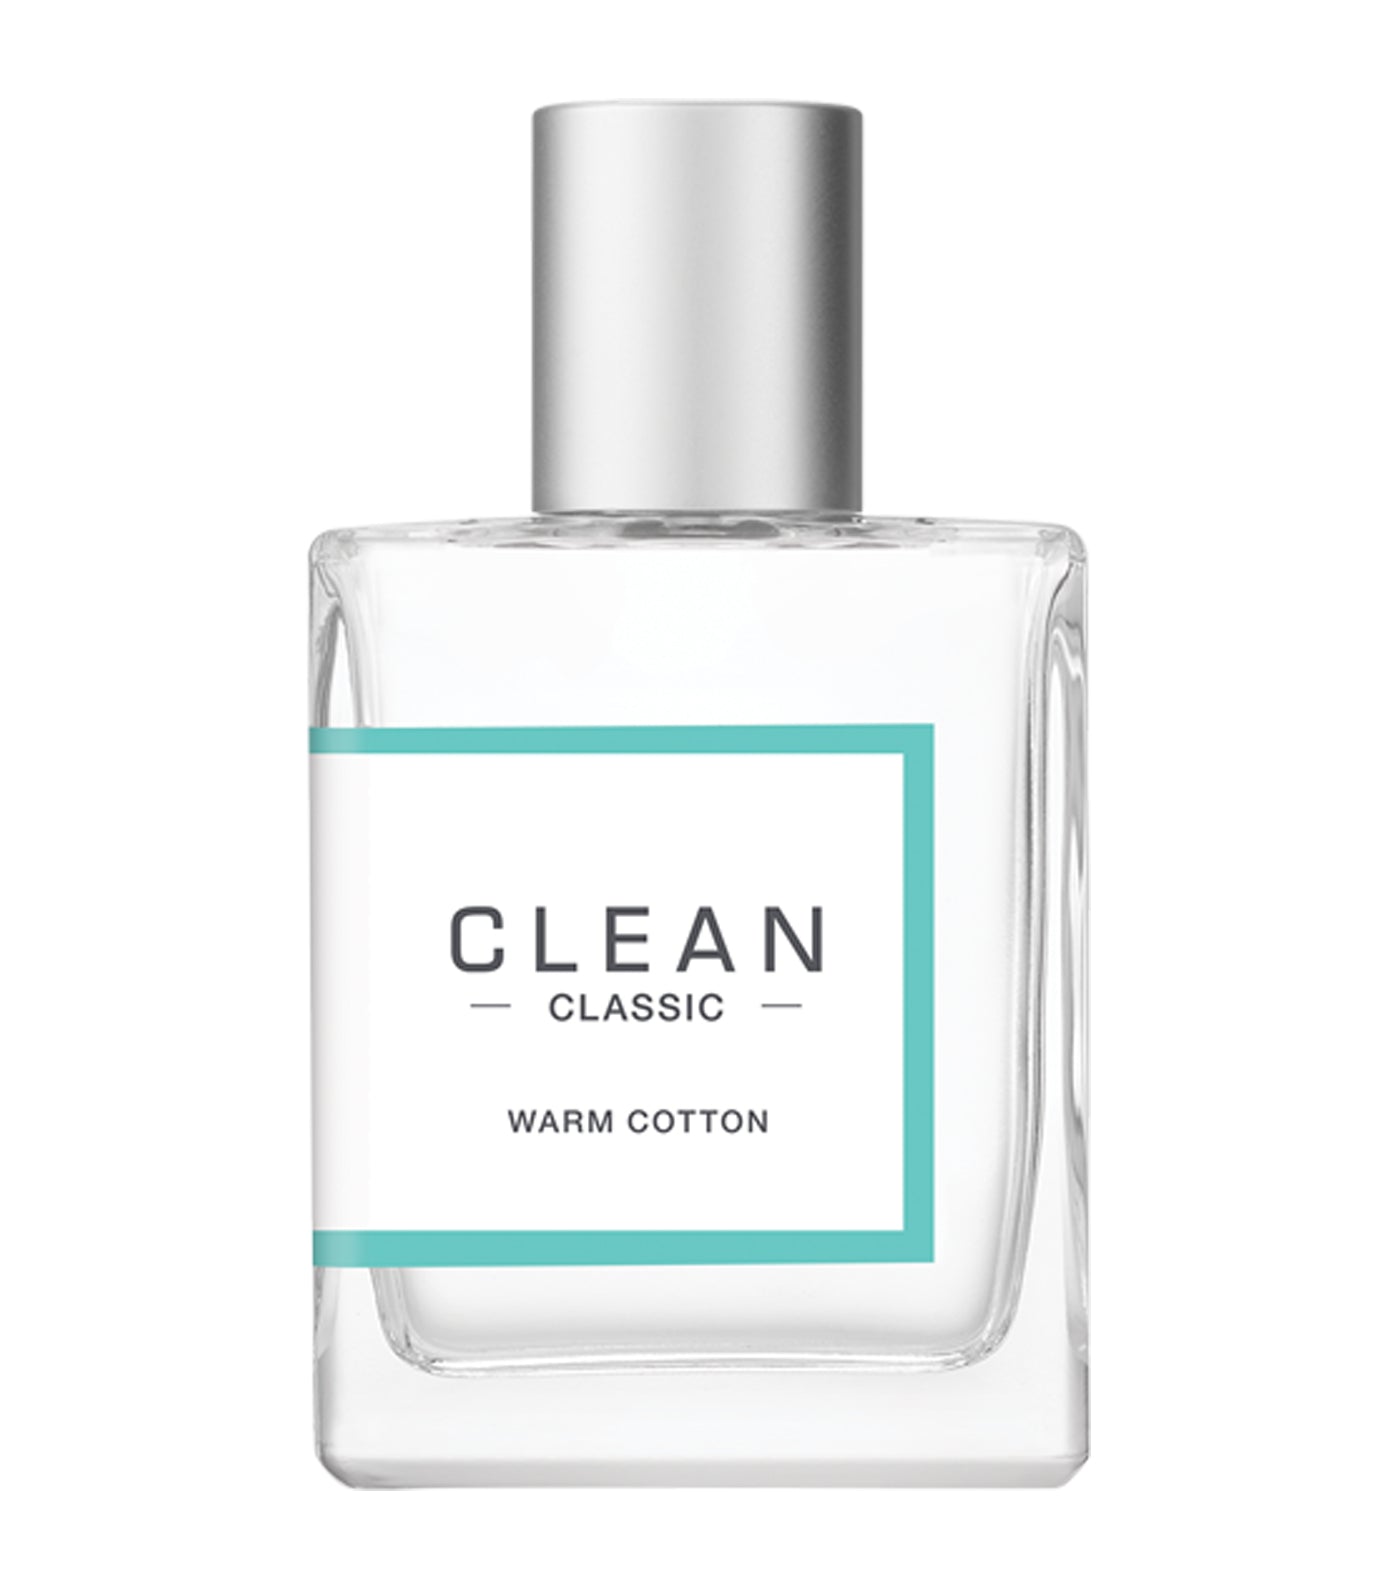 CLEAN CLASSIC Warm Cotton by CLEAN Beauty Collective